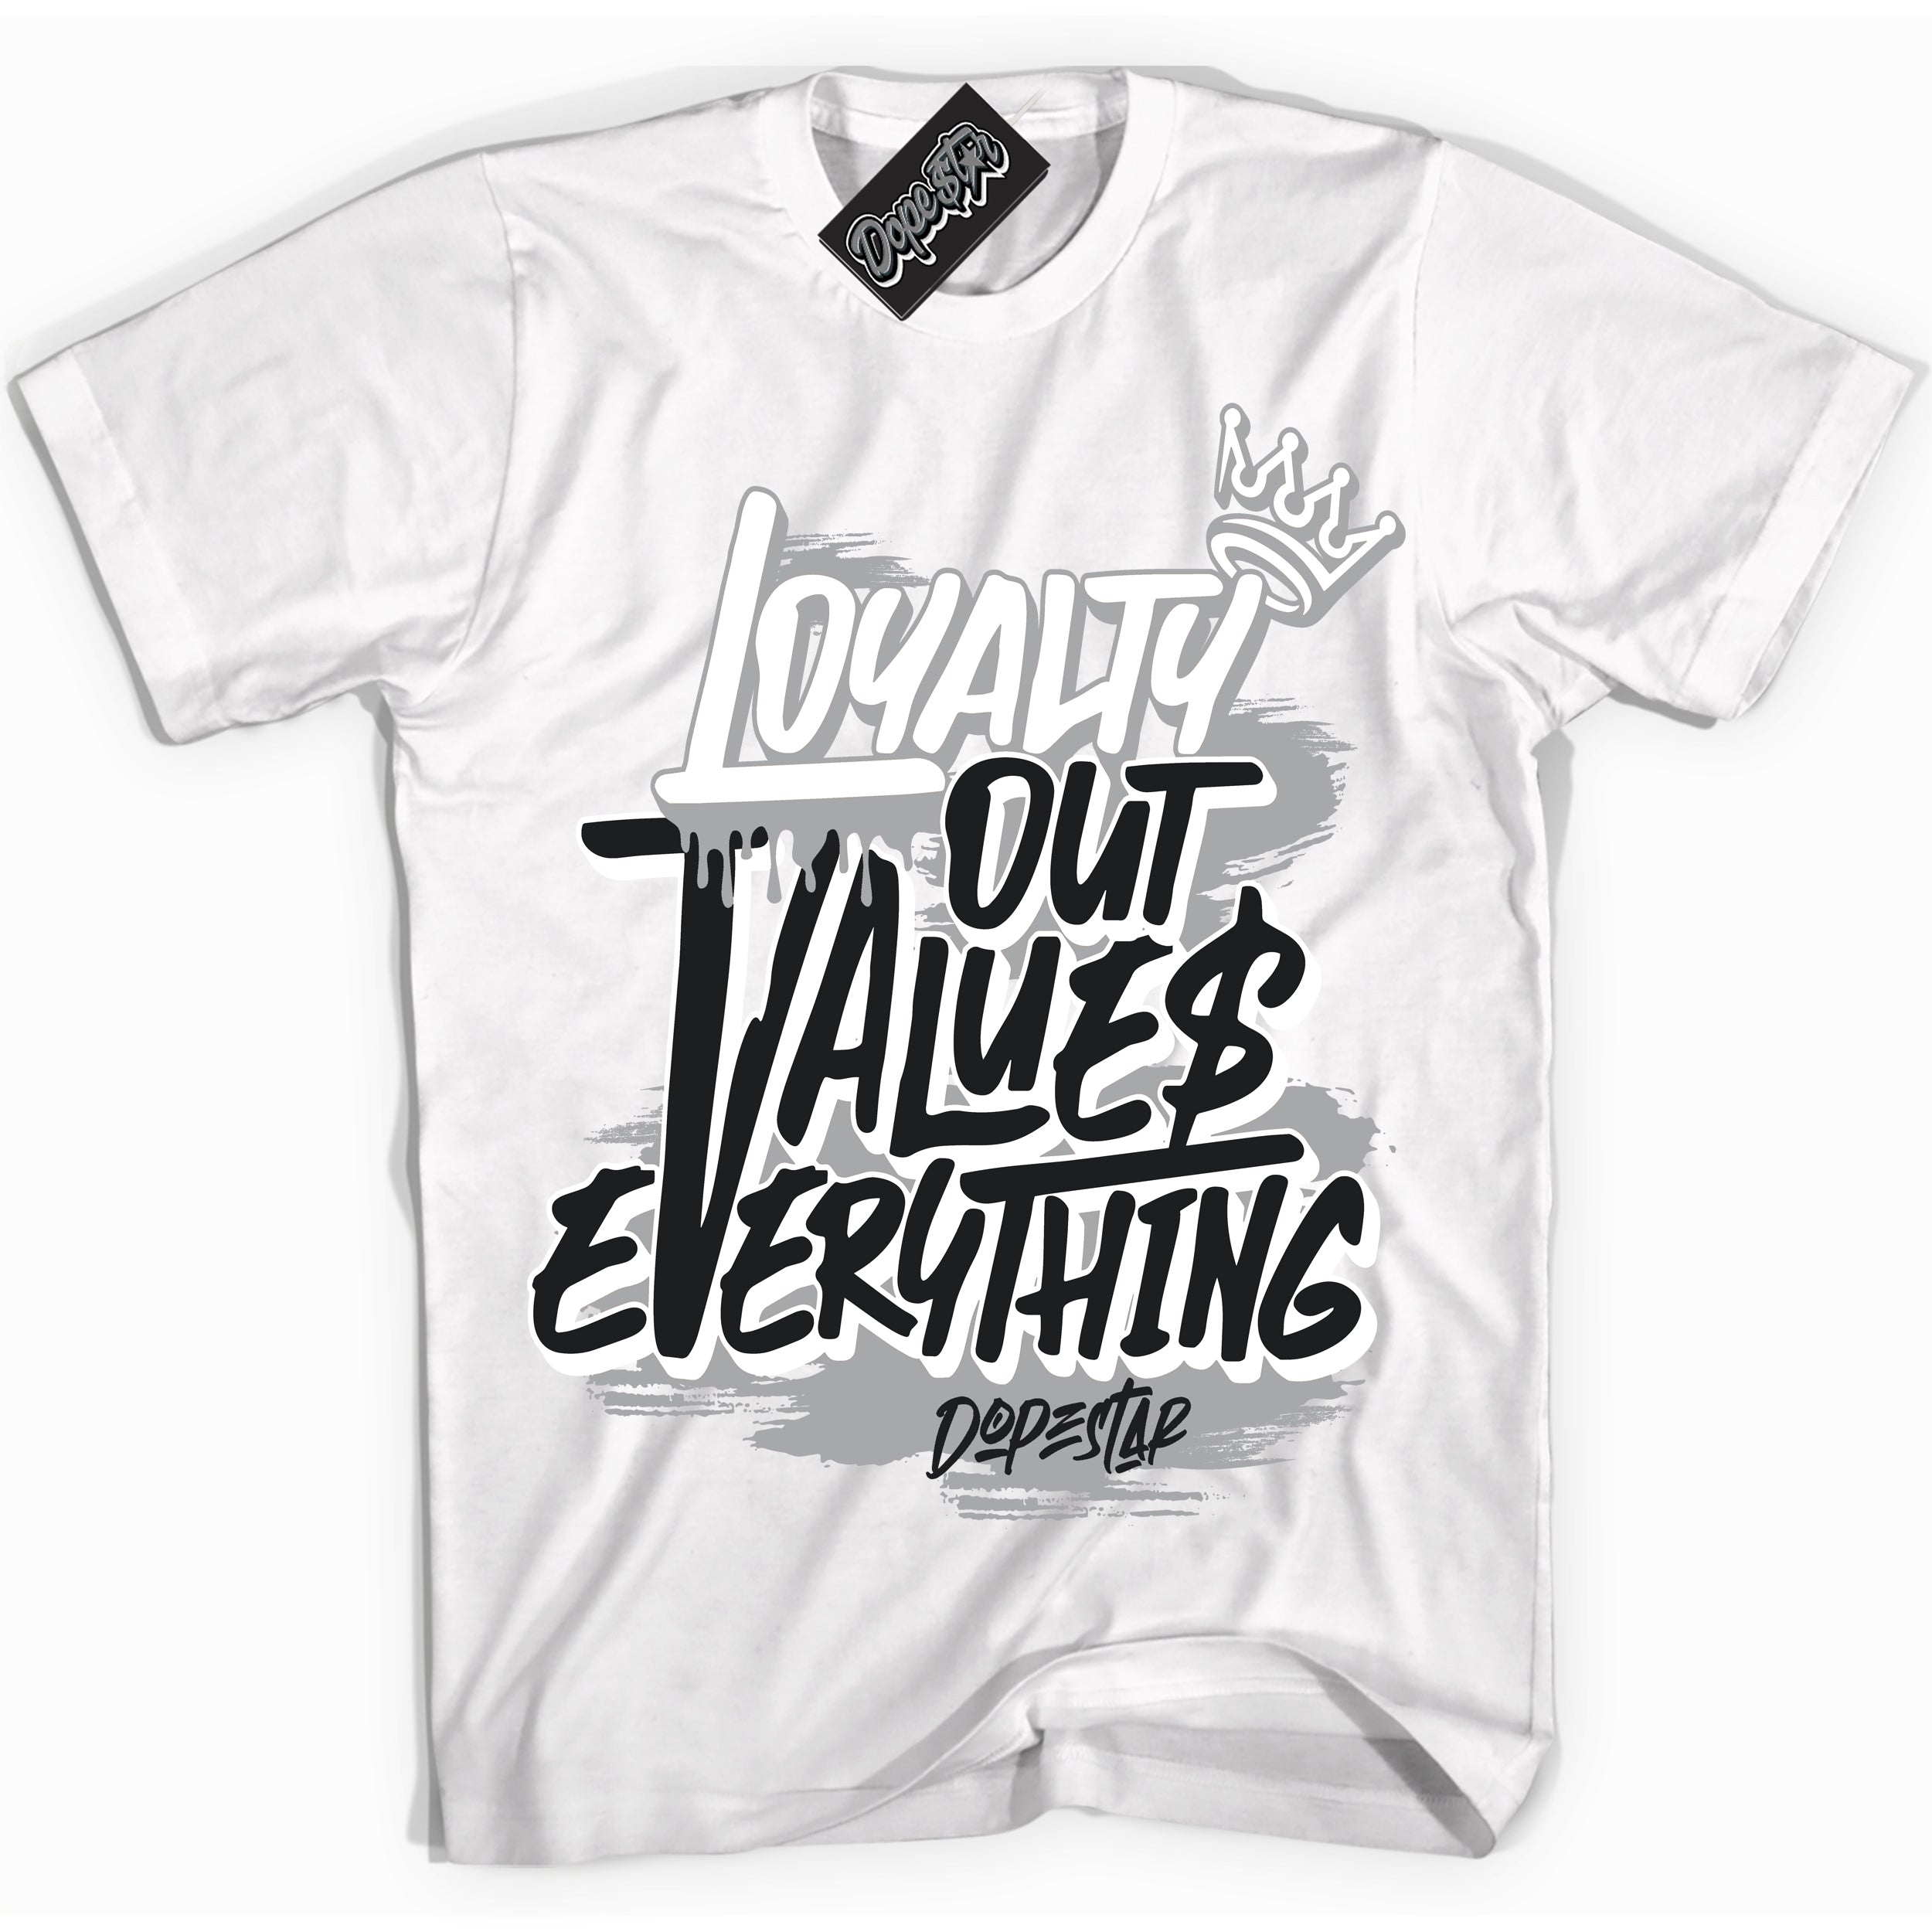 Cool White Shirt with “ Loyalty Out Values Everything” design that perfectly matches Lottery Pack Grey Fog Sneakers.